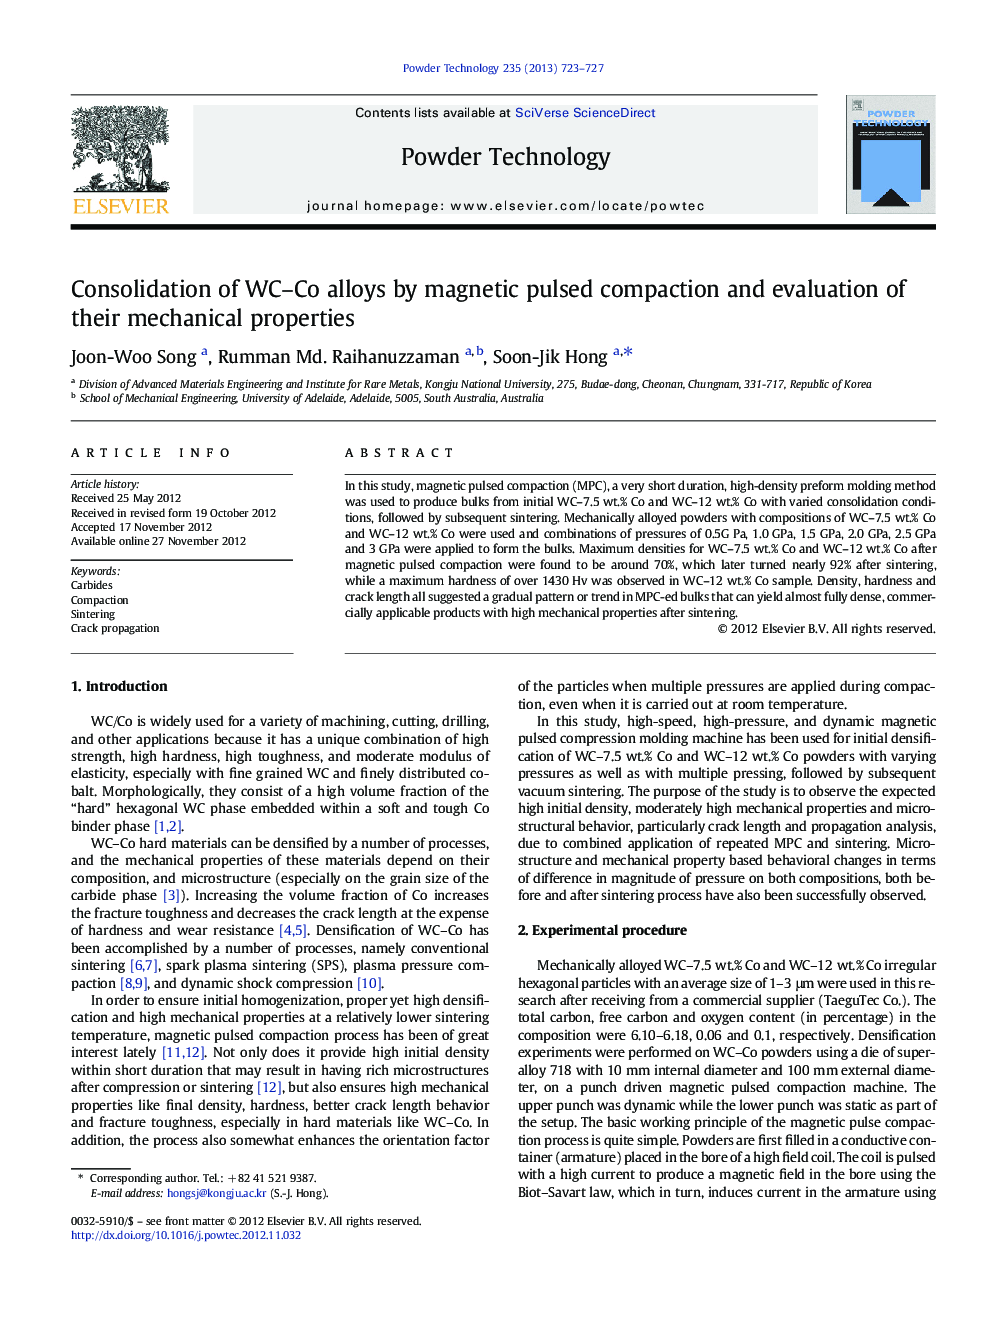 Consolidation of WC–Co alloys by magnetic pulsed compaction and evaluation of their mechanical properties